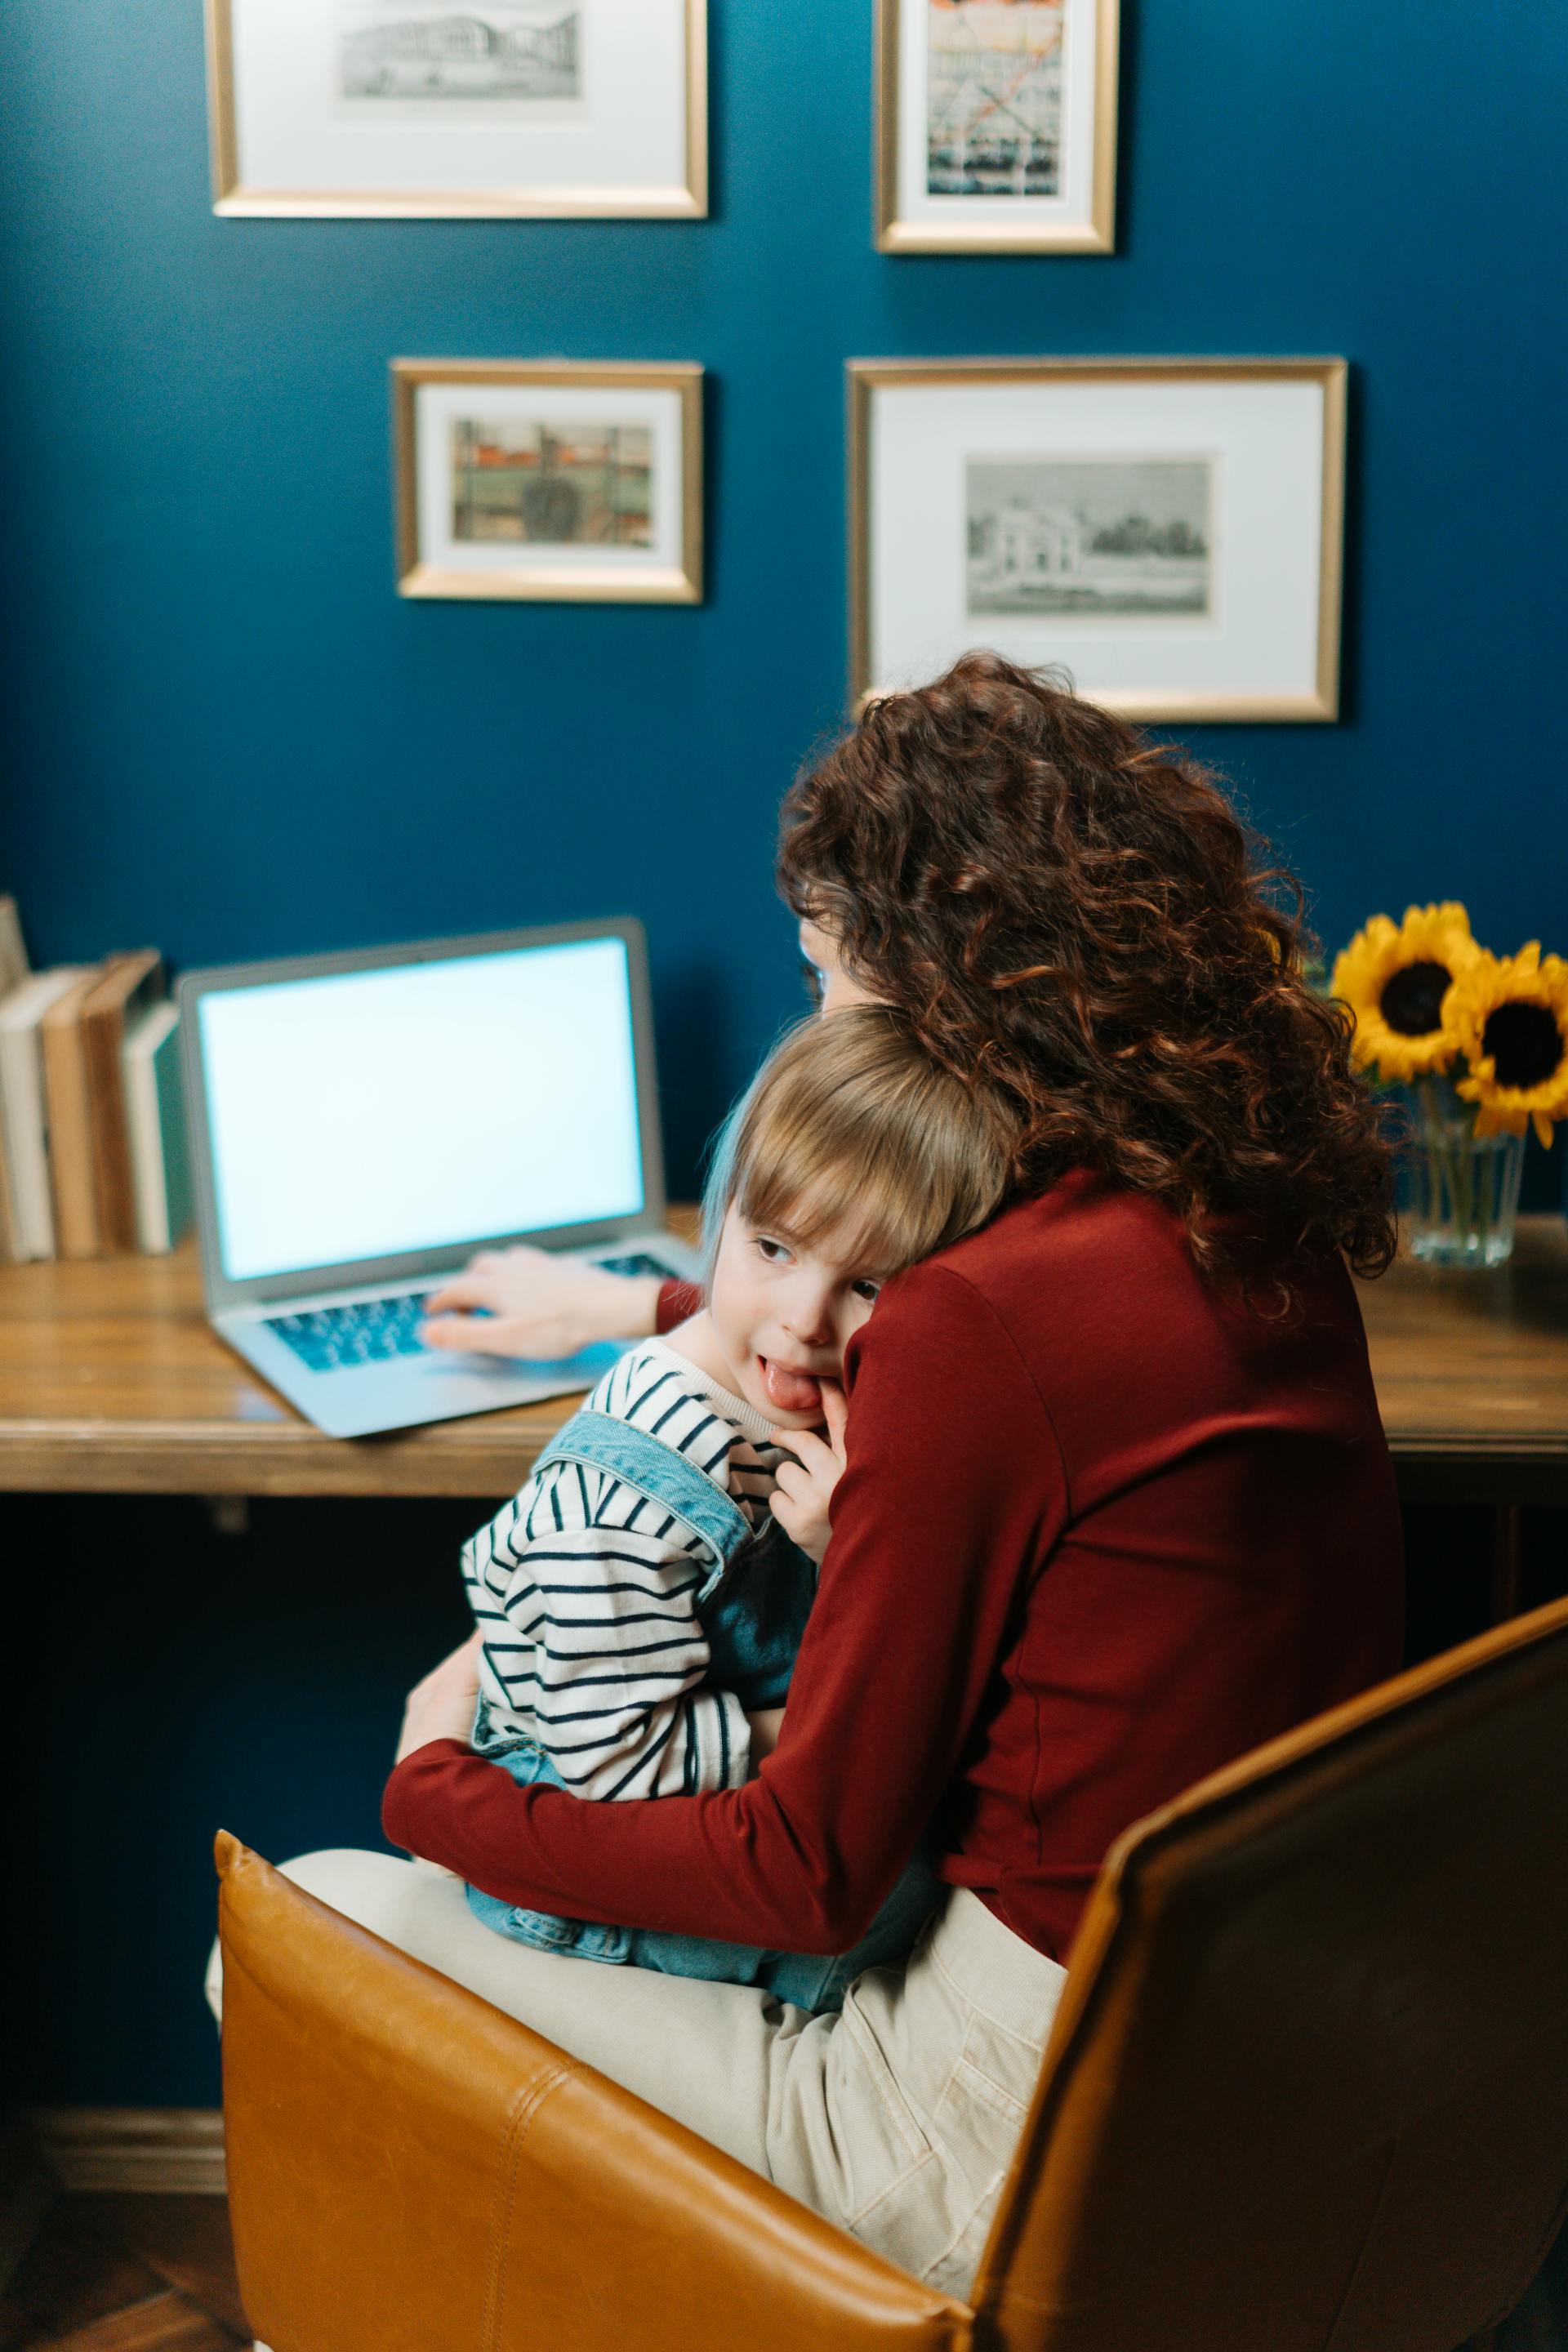 A woman holding a little boy while working on the laptop | Source: Pexels